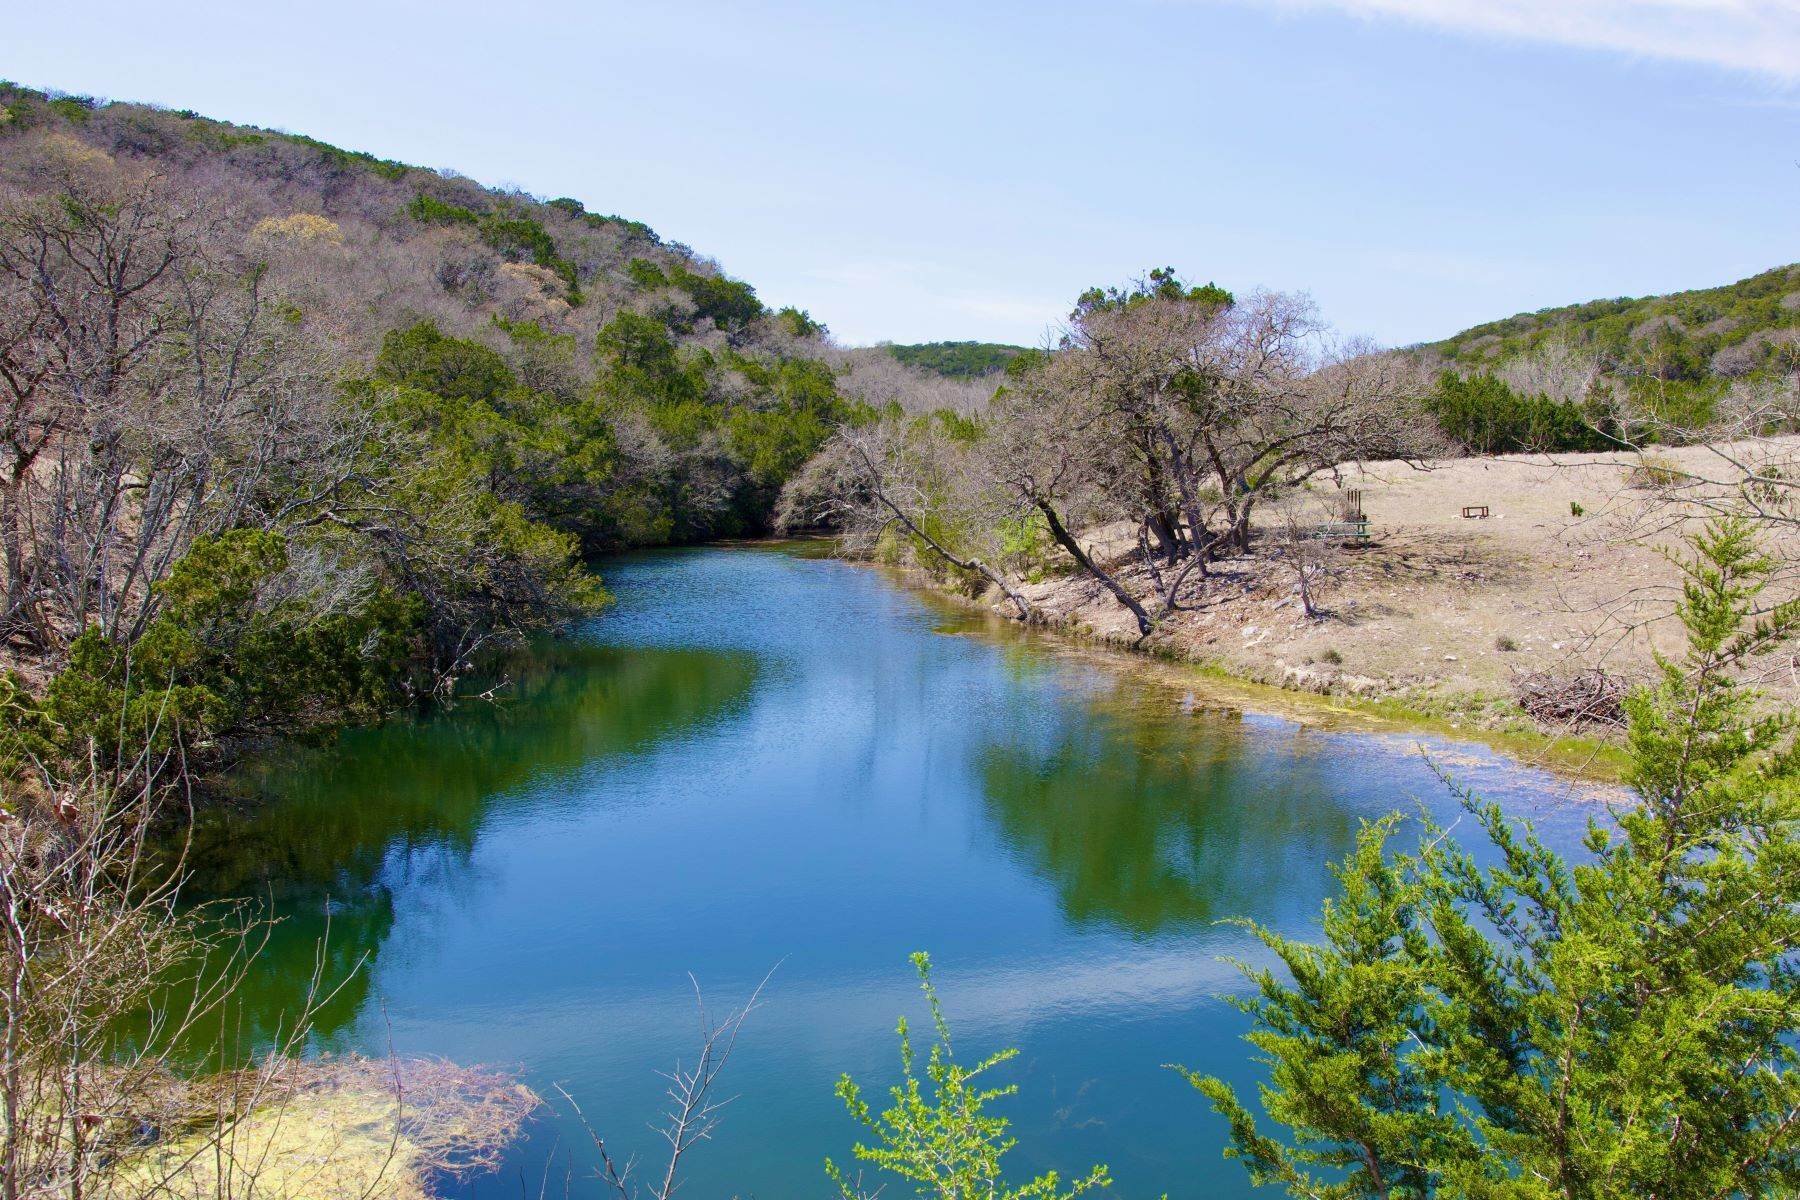 Property for Sale at 2,269.85+/- Acres Less Ranch, Kendall County, Boerne, TX 78006 2,269.85+/- Acres Less Ranch, Kendall County, 650 Wild Turkey Blvd. Boerne, Texas 78006 United States